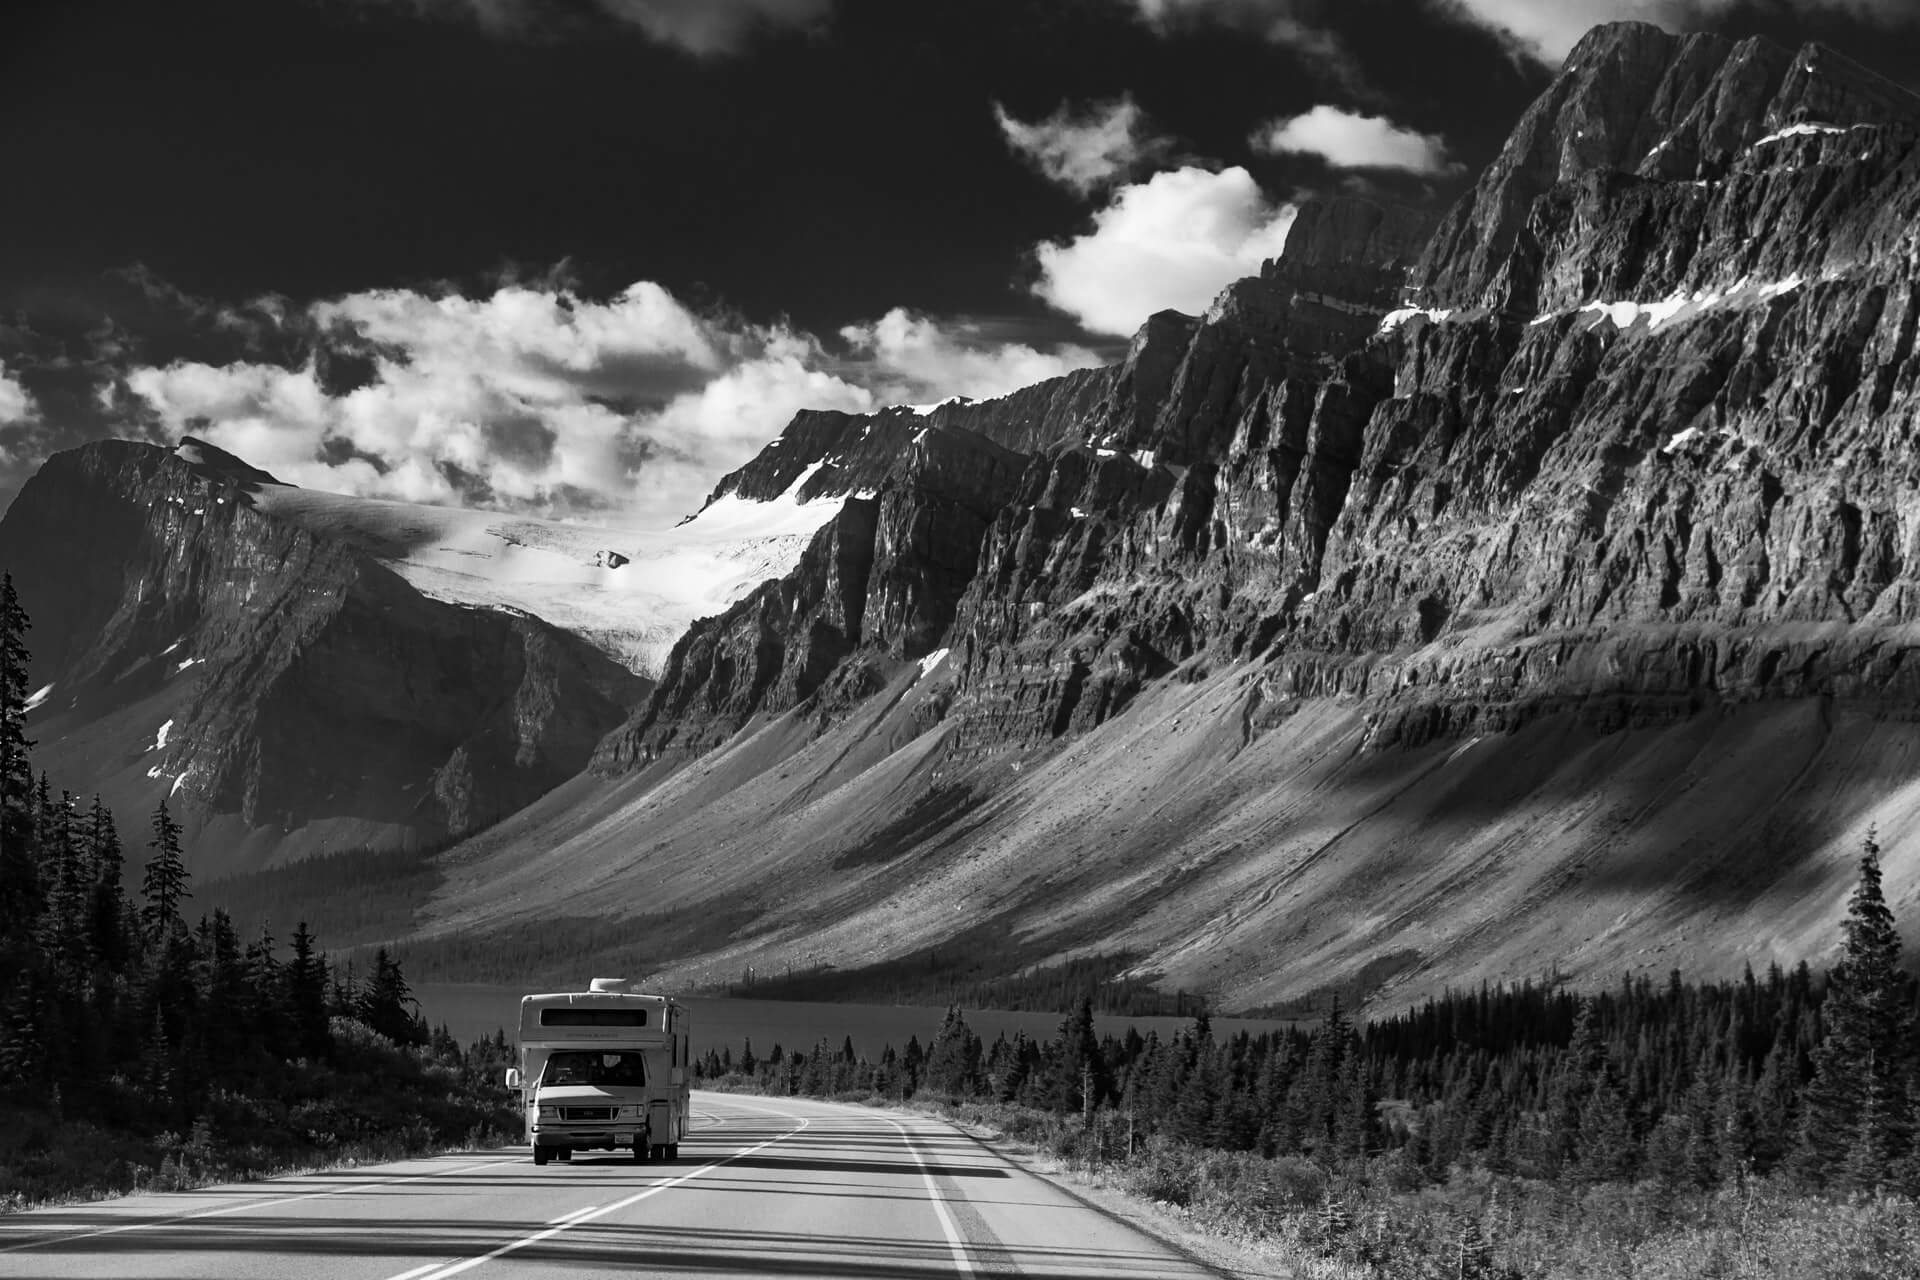 A rental RV on a planned road trip through the Canadian Rocky Mountains